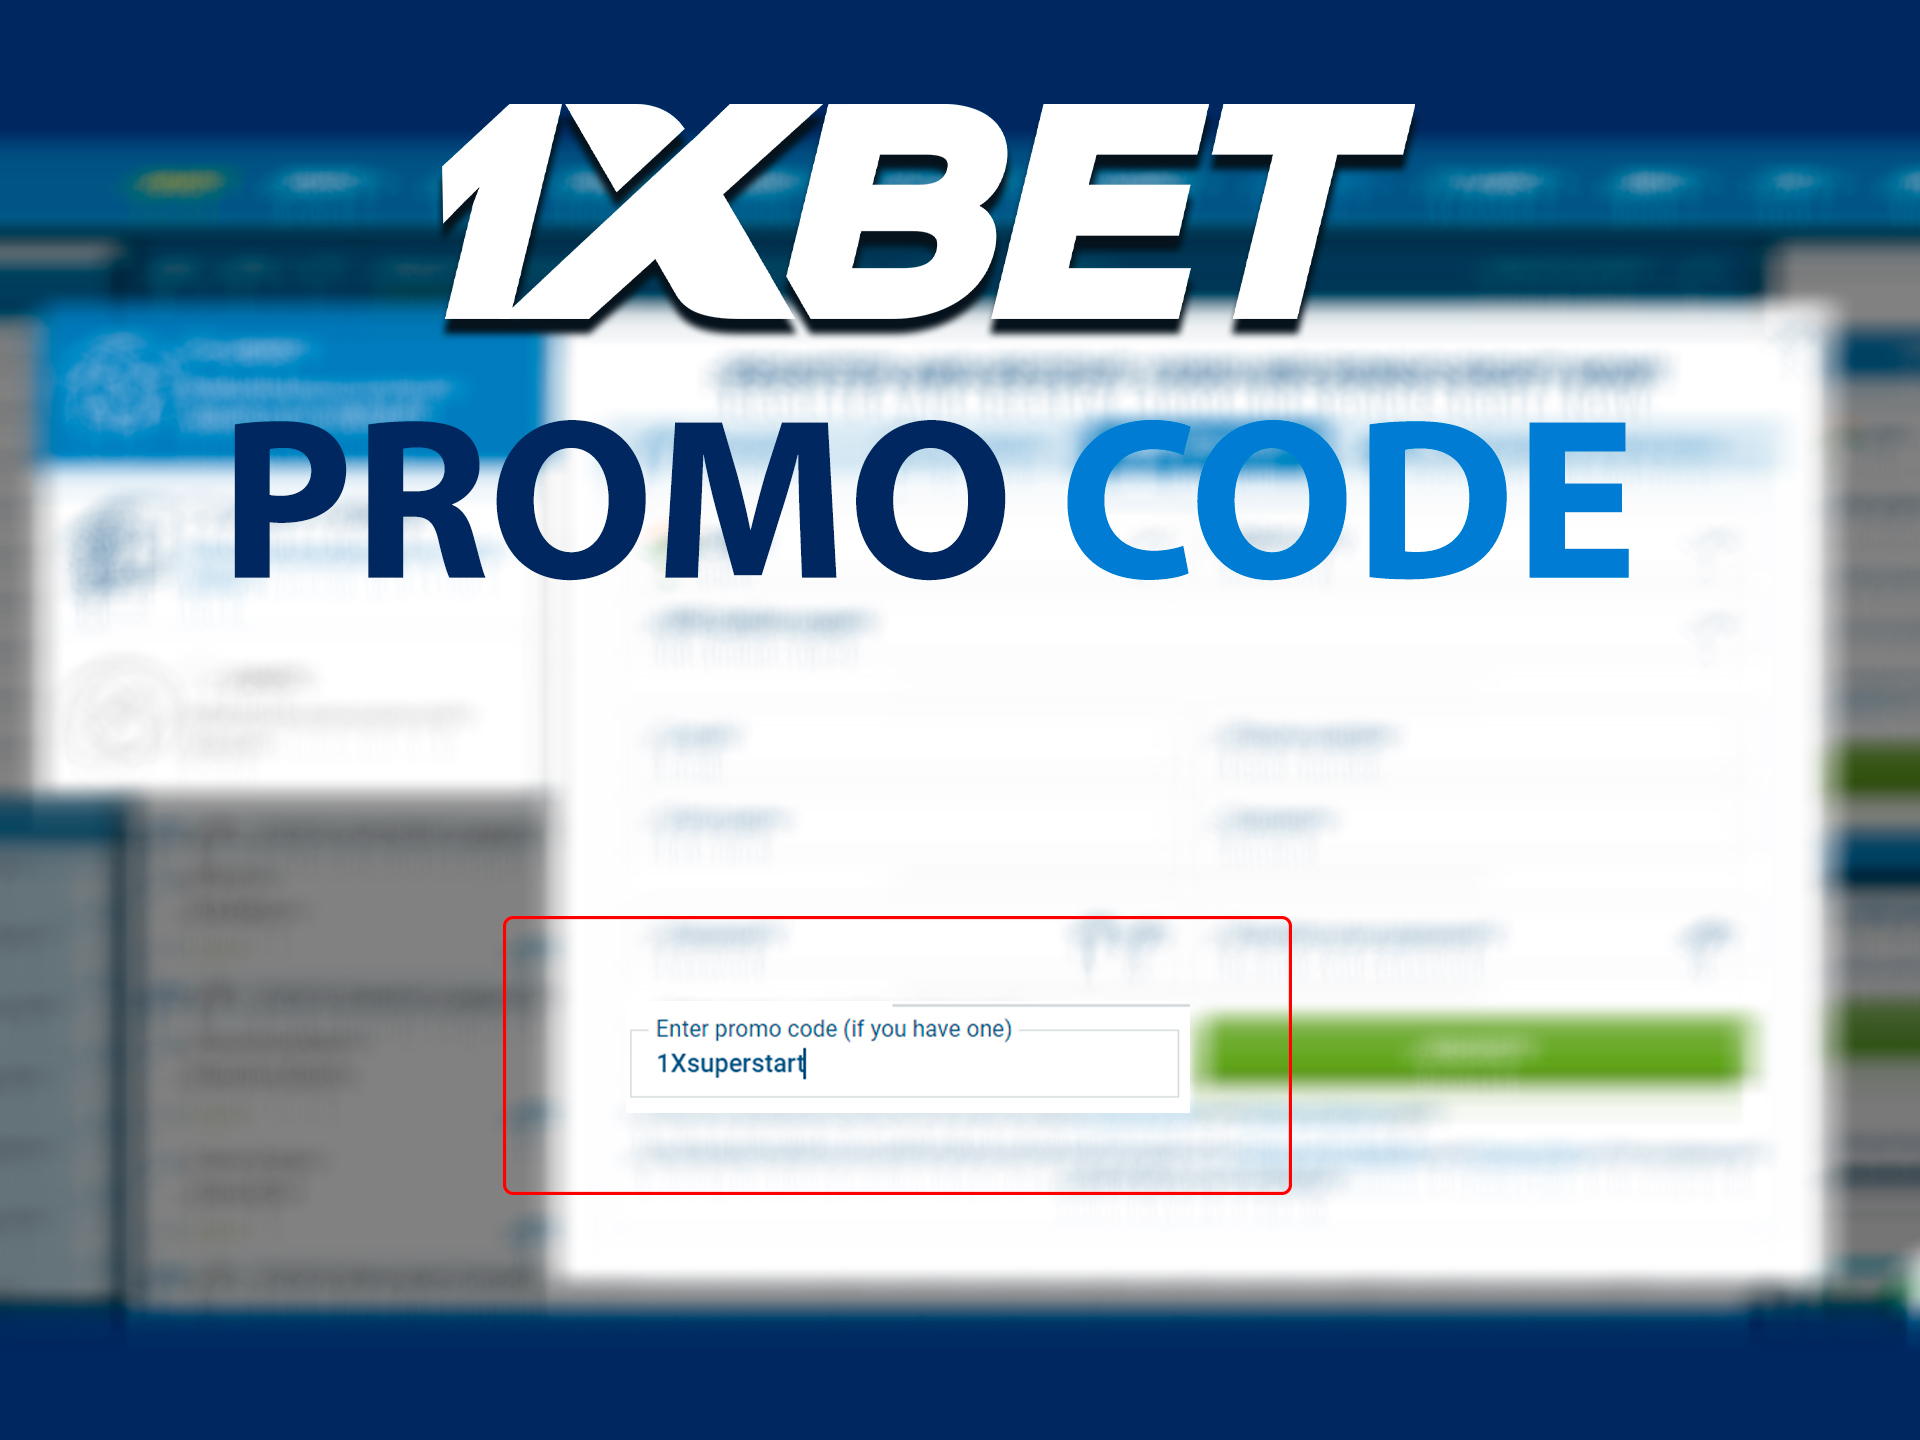 promo code for an extra bonus when registering at 1xBet.